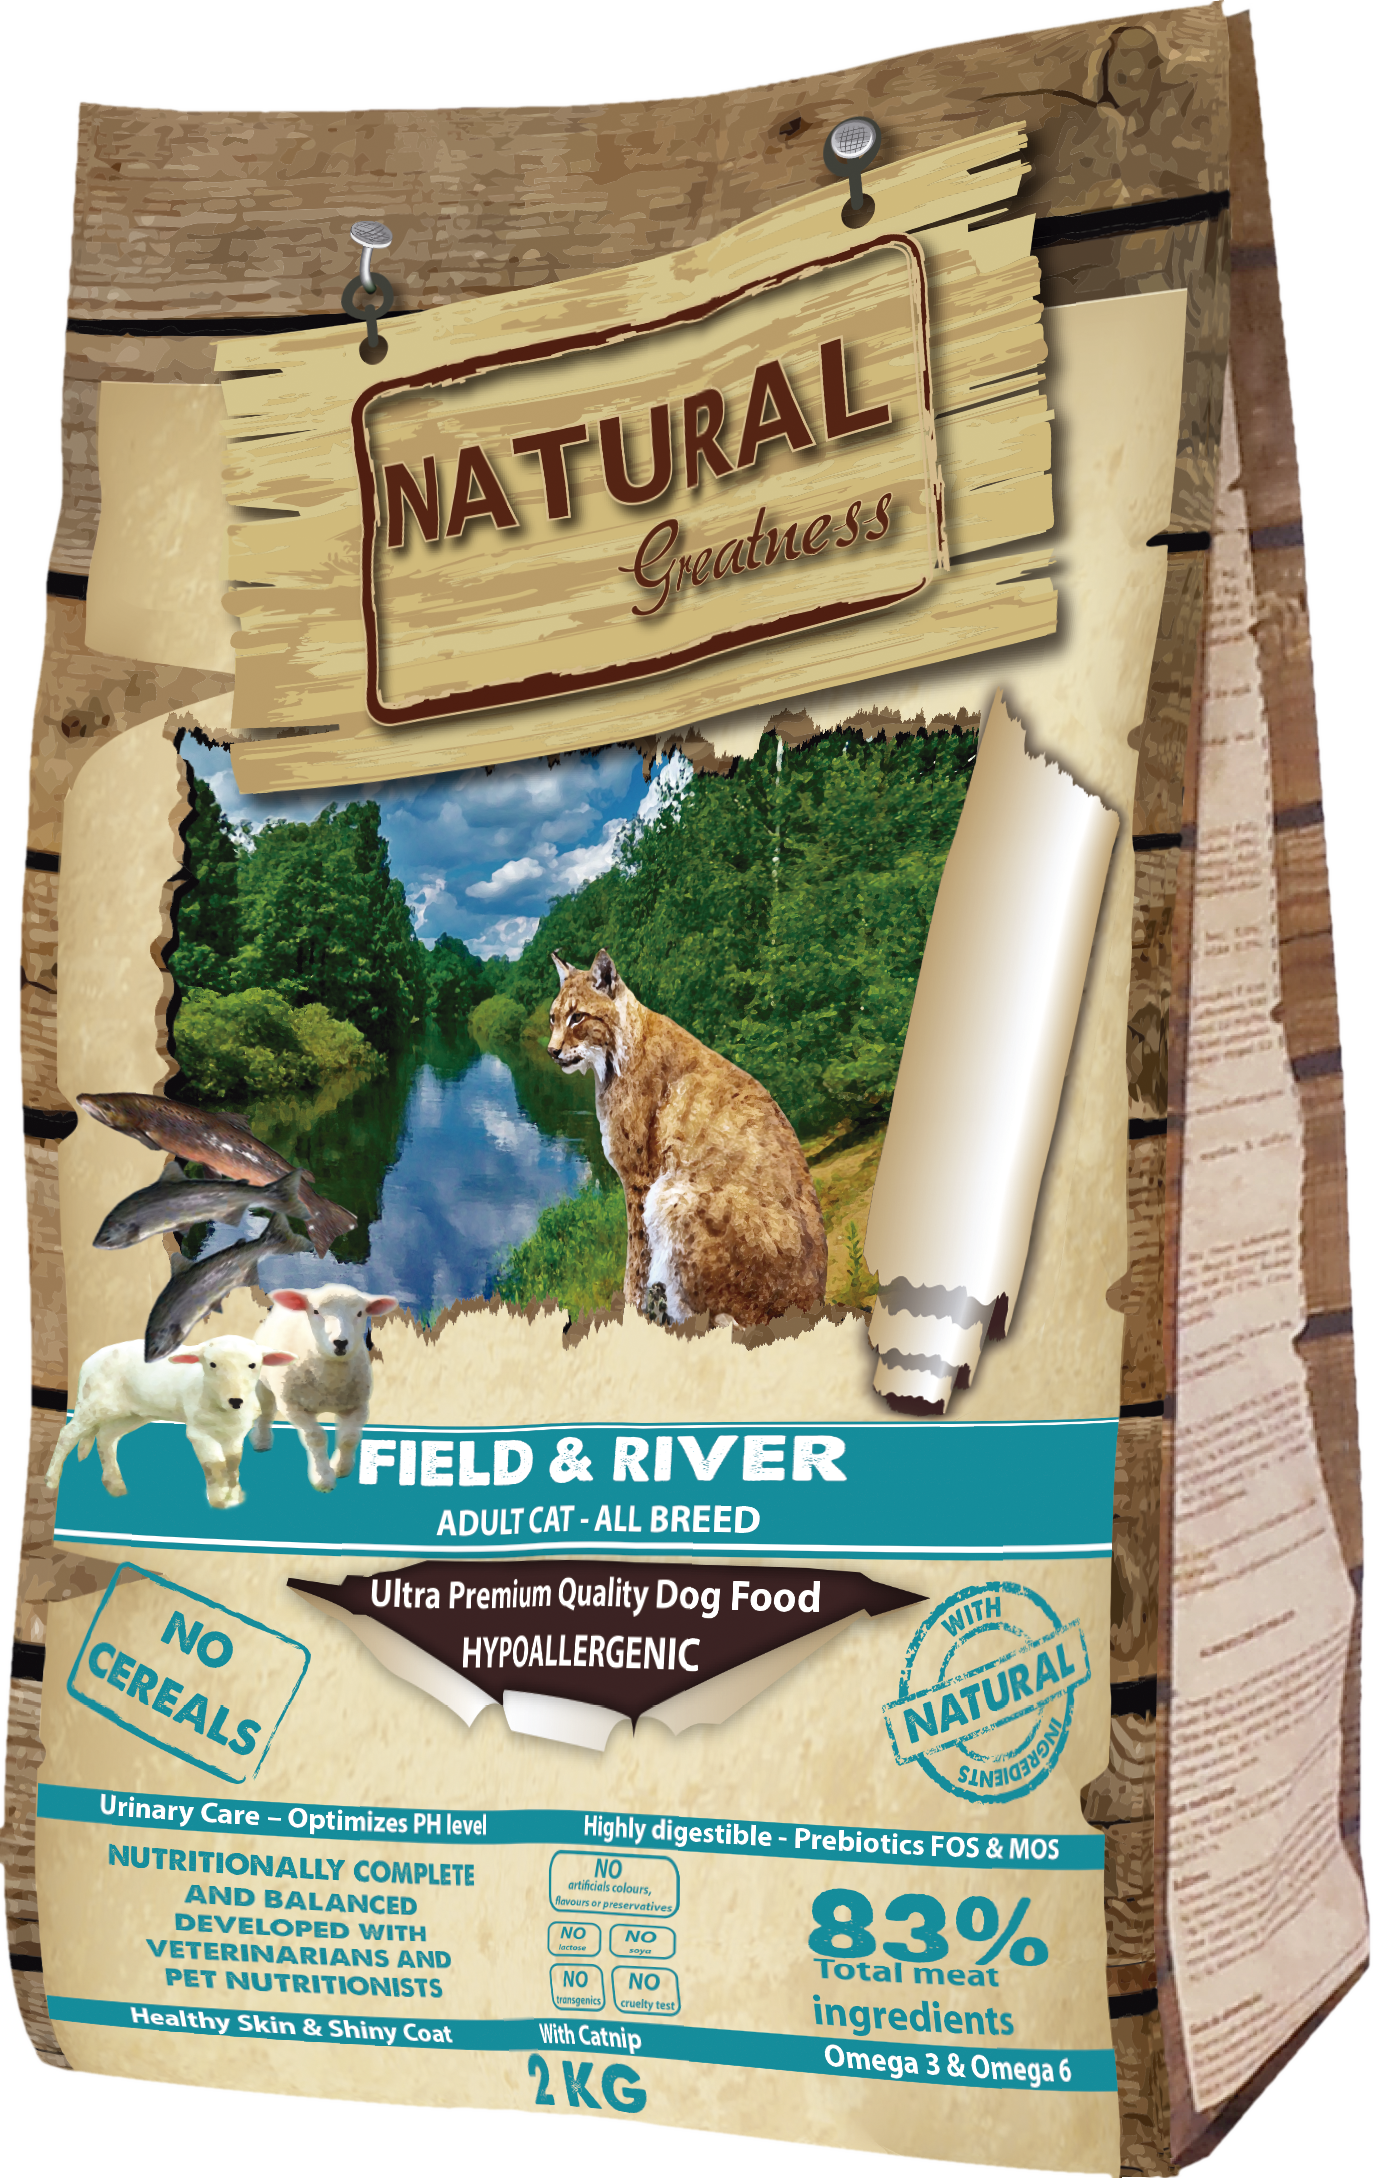 Natural Greatness Cat Field & River 2kg - Chrysdietetic